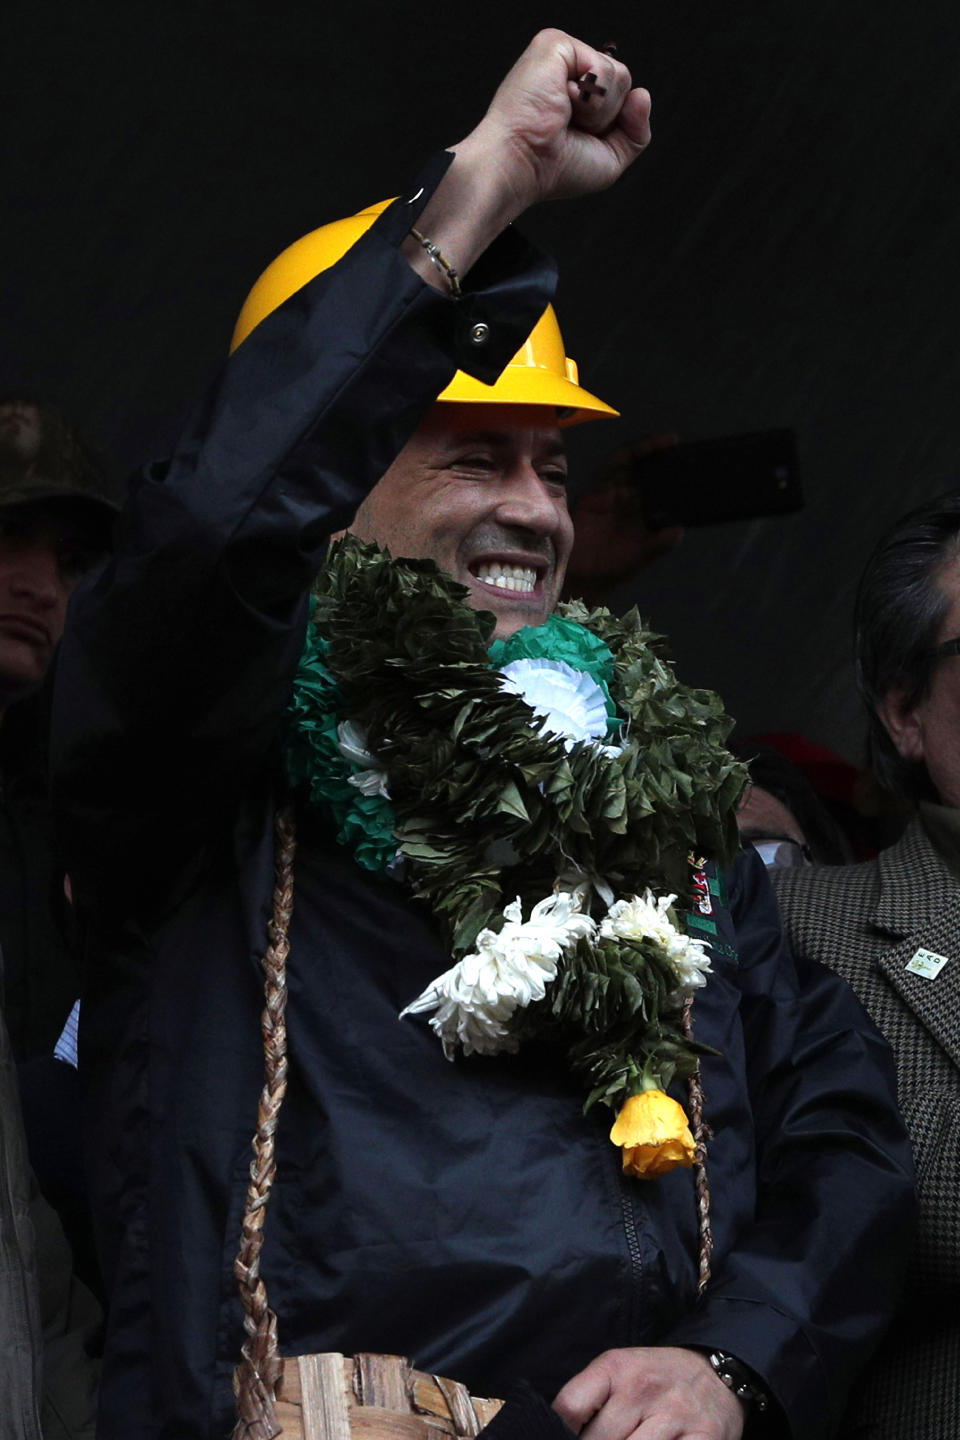 Luis Fernando Camacho, opposition leader and president of the Civic Committee Pro Santa Cruz, attends a rally with the coca leaf growers in La Paz, Bolivia, Thursday, Nov. 7, 2019. The United Nations on Thursday urged Bolivia's government and opposition to restore "dialogue and peace" after a third person was killed in street clashes that erupted after a disputed presidential election on Oct. 20. (AP Photo/Juan Karita)